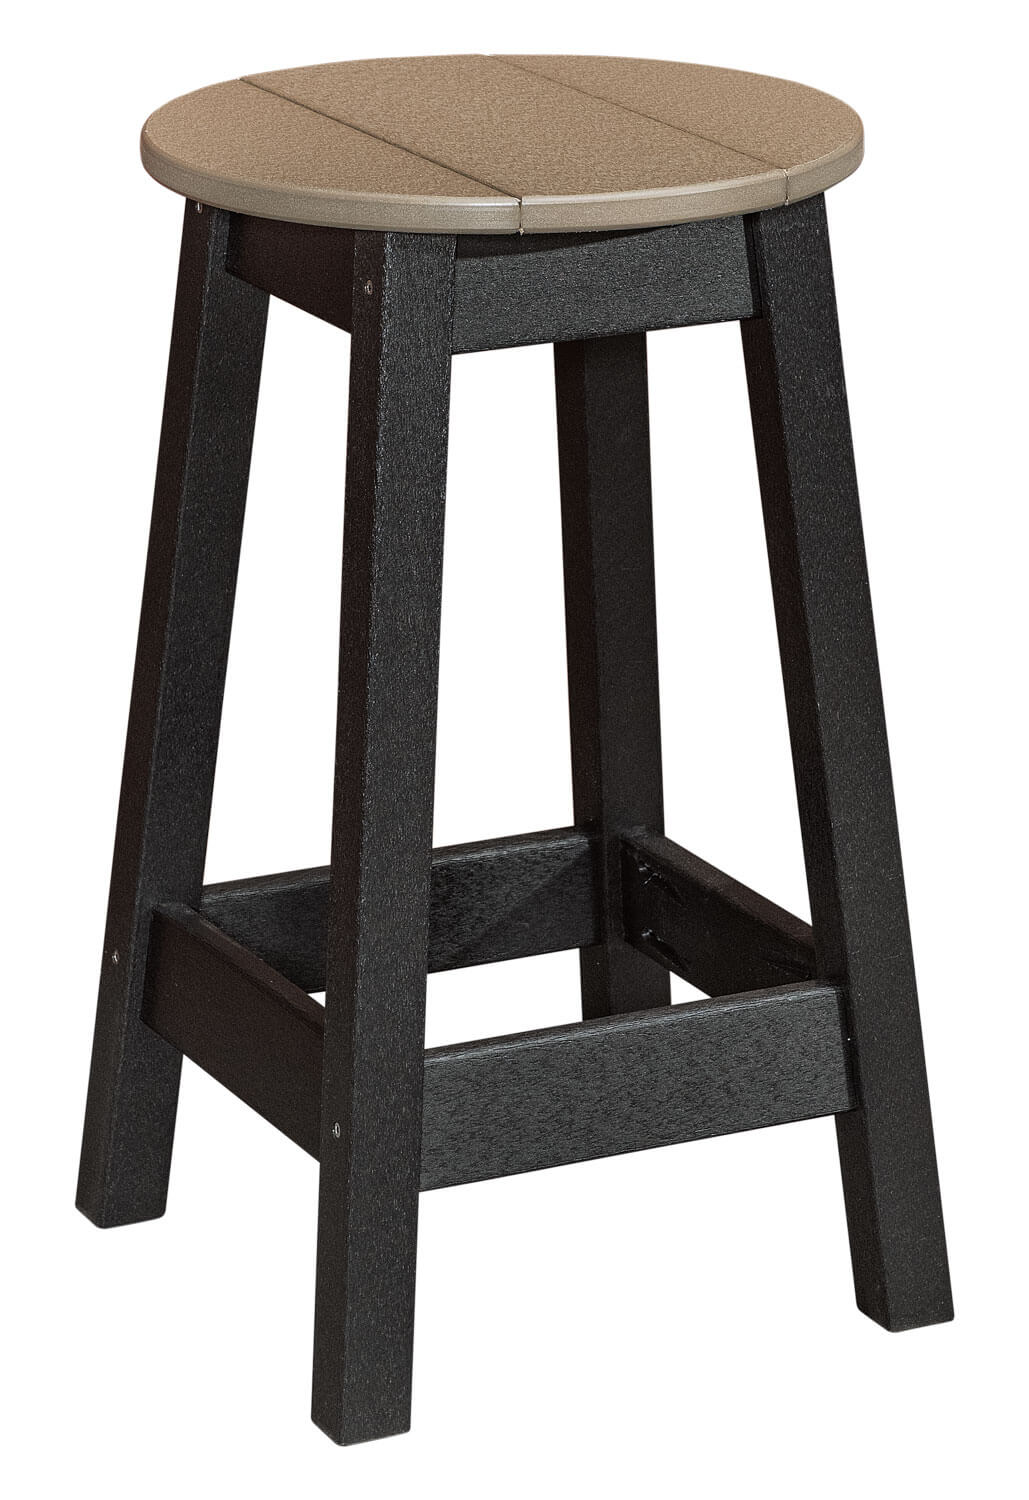 EC Woods Westbrook Outdoor Poly Counter Height Round Stool Shown in Weathered Wood and Black